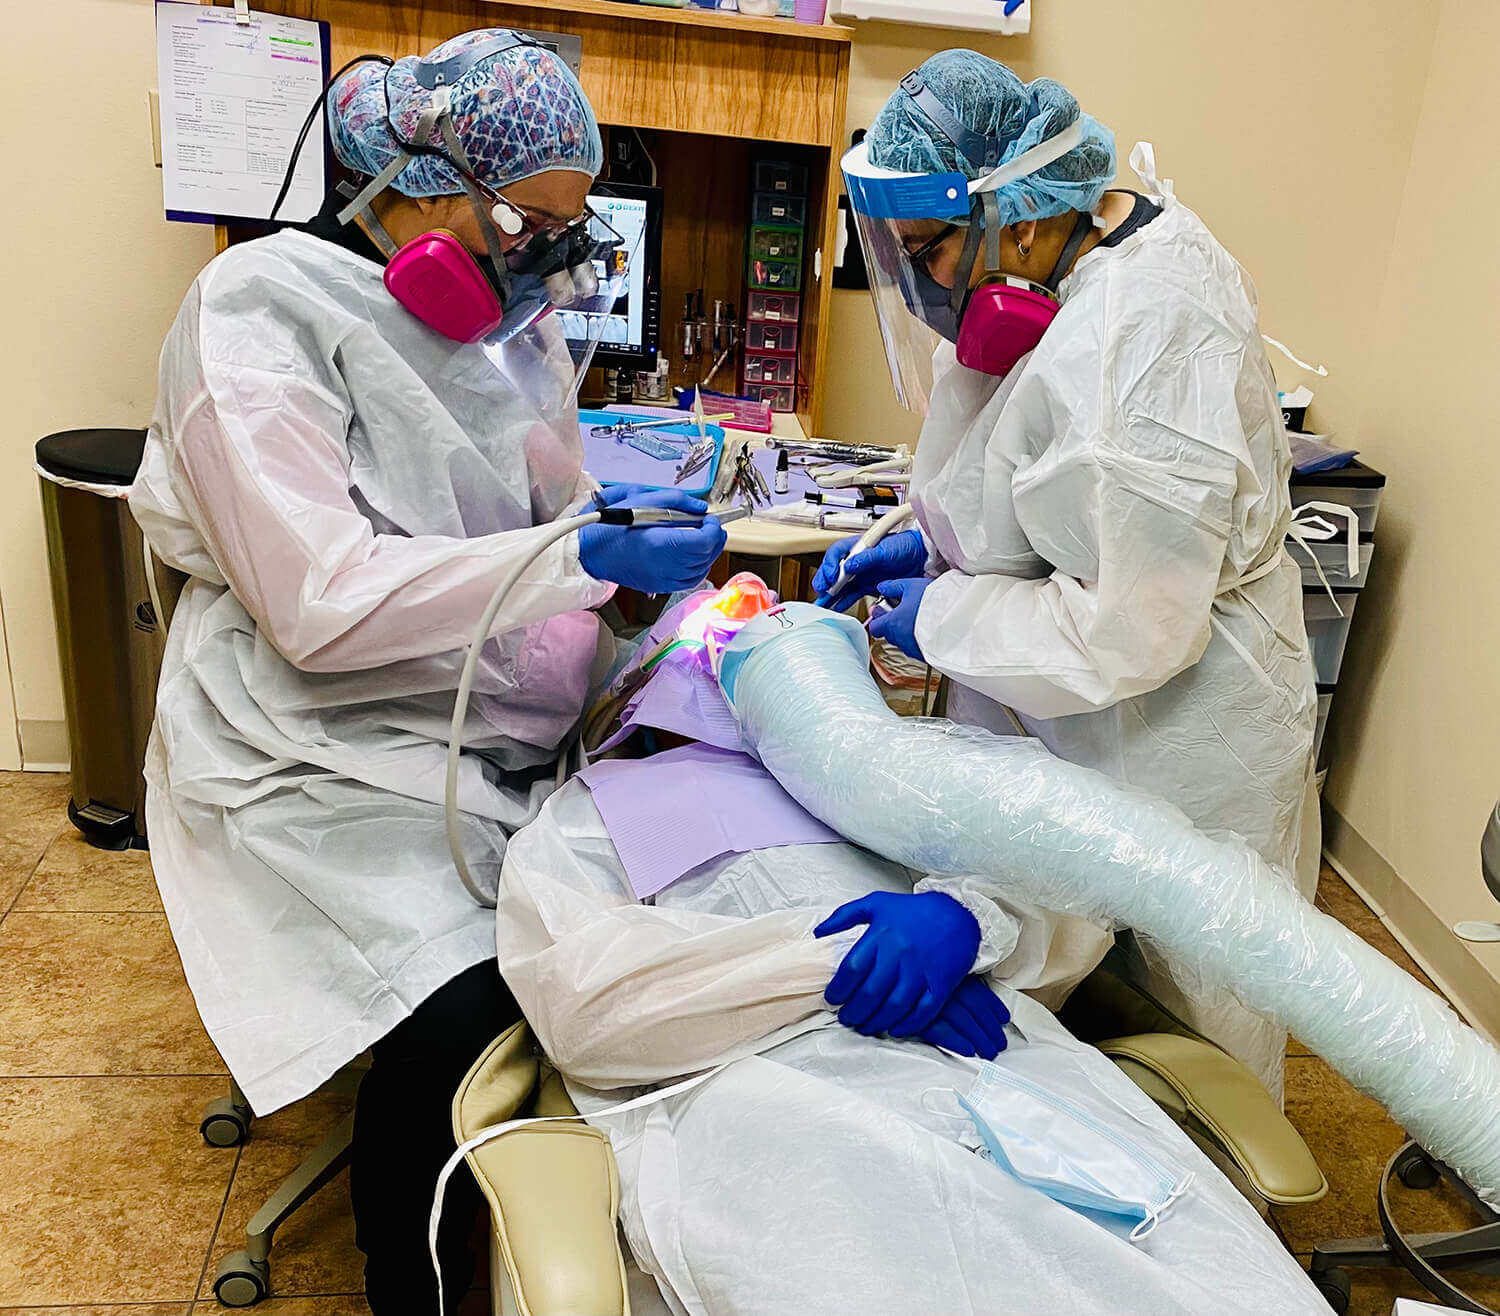 Dr. Oushy and her assistant performing the safe amalgam removal